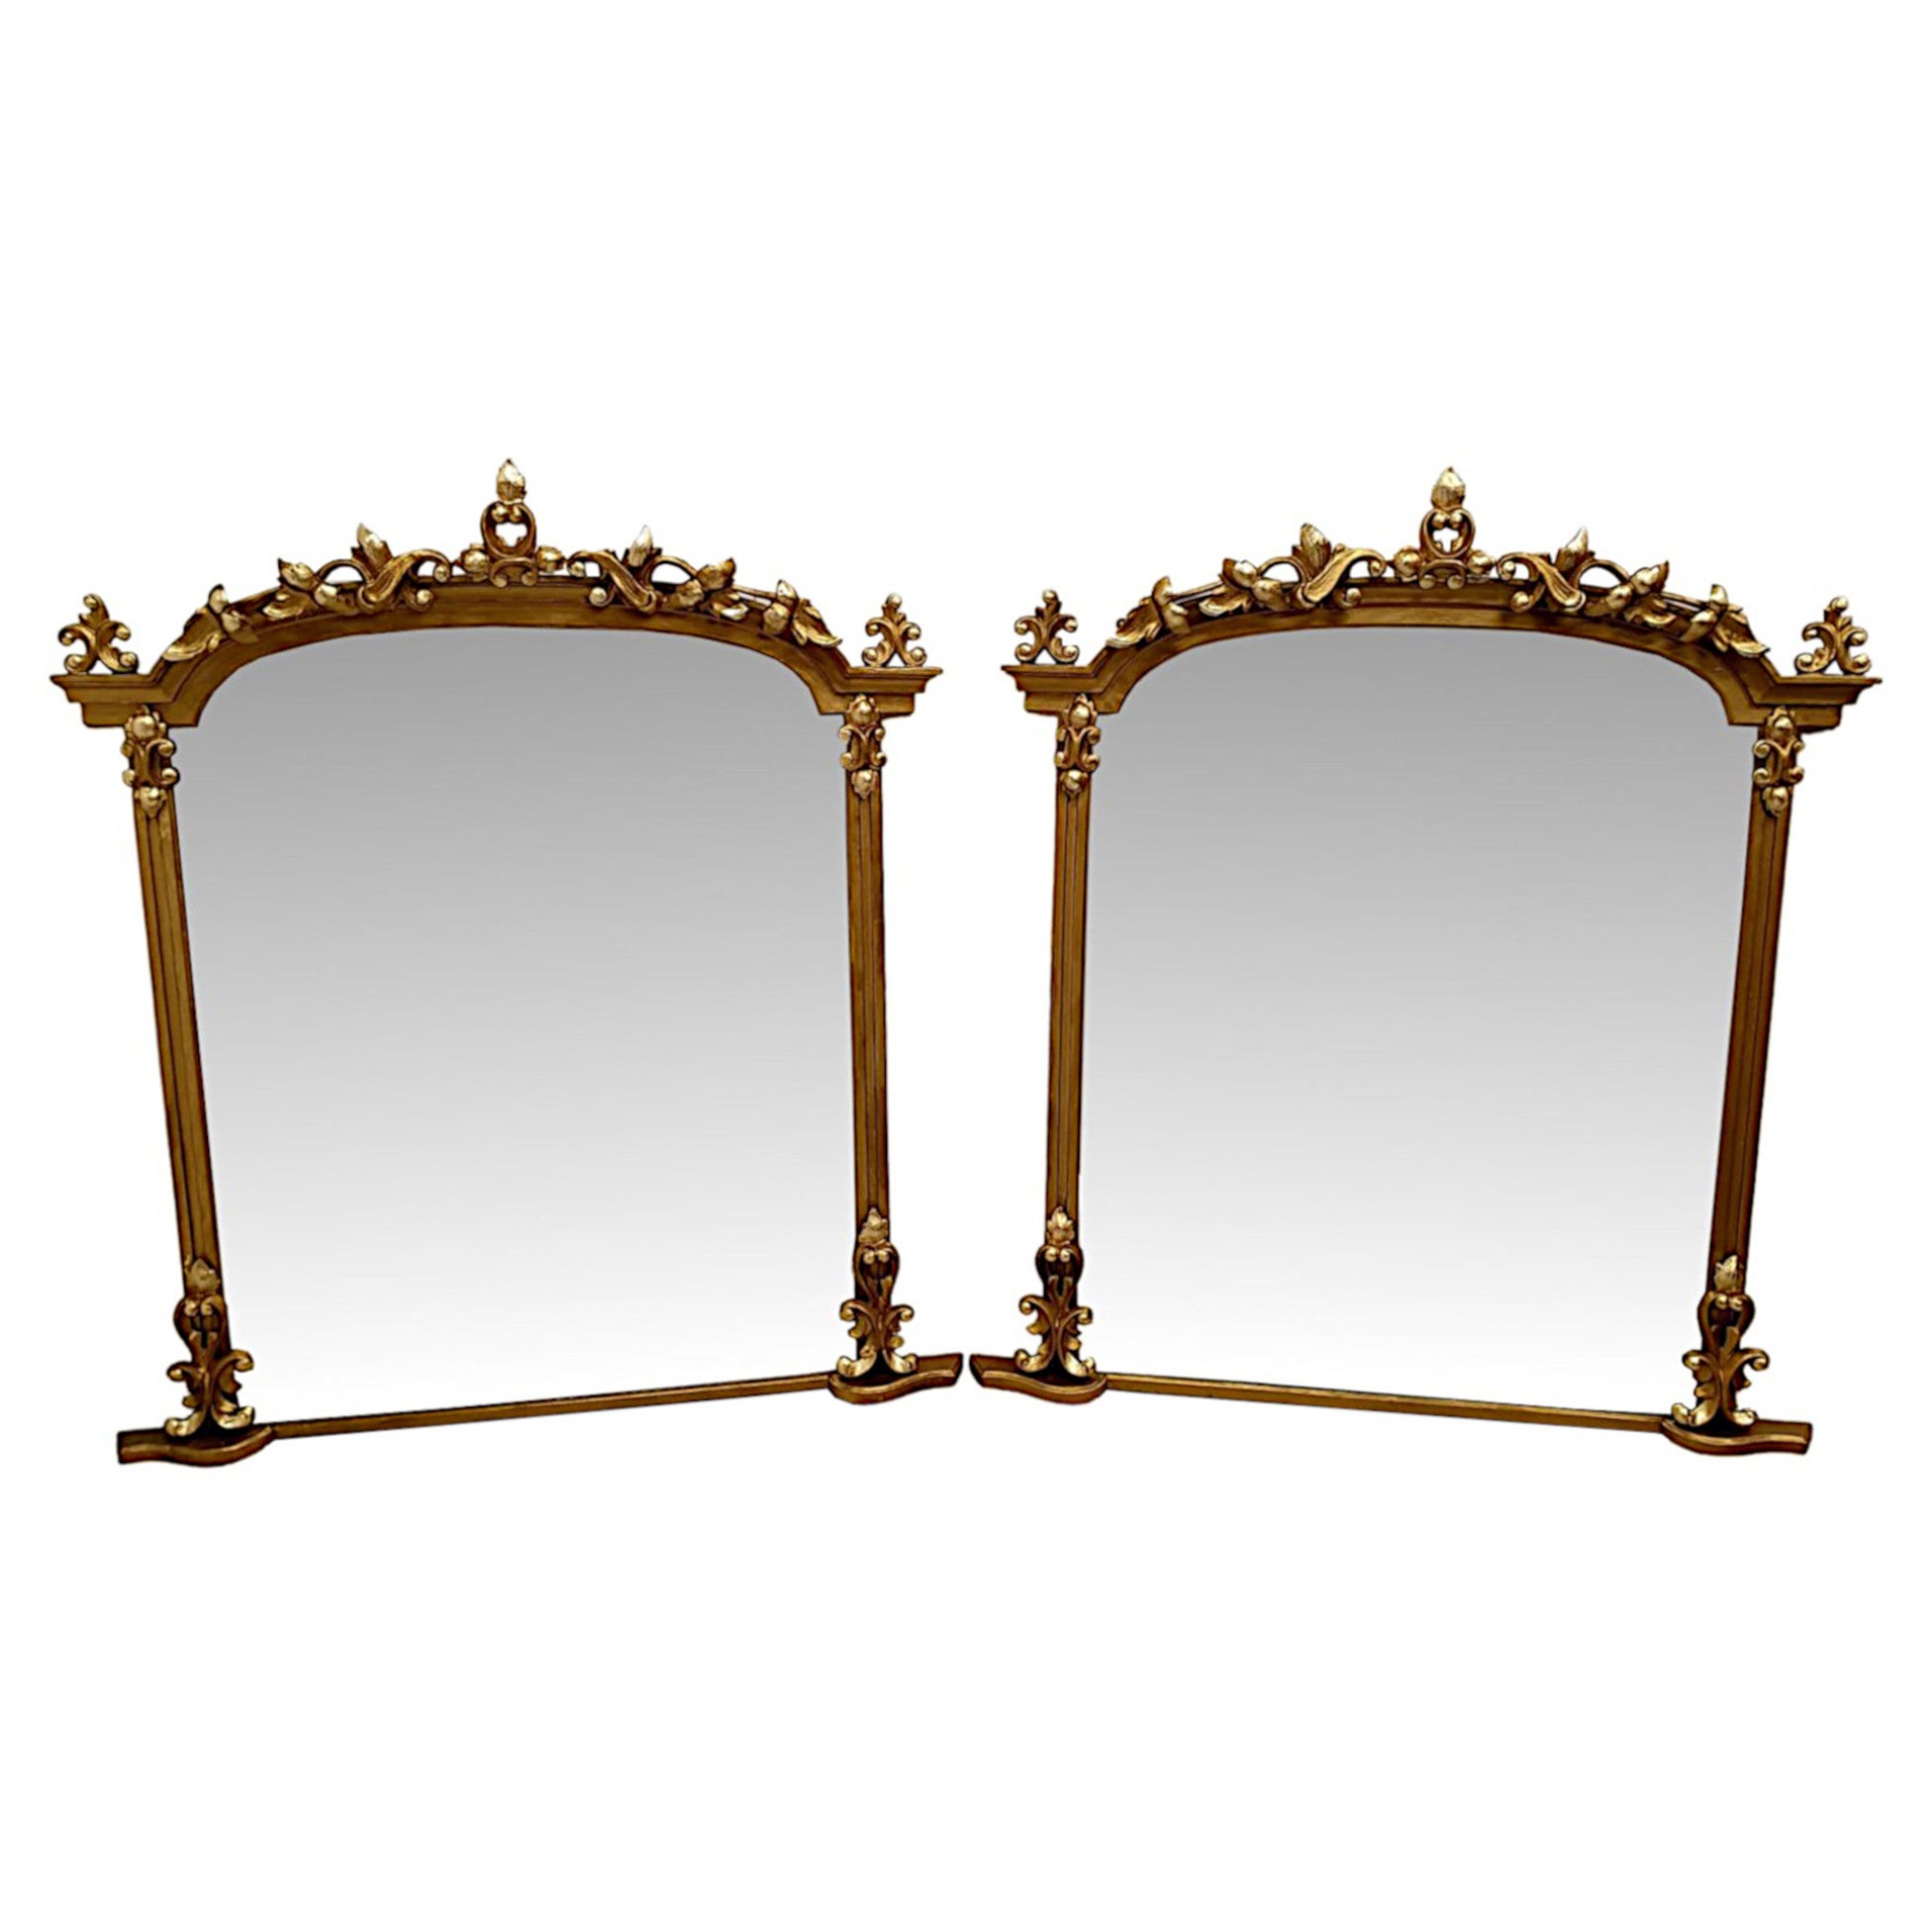 A Very Rare and Fine Pair of 19th Century Giltwood Overmantle Mirrors For Sale